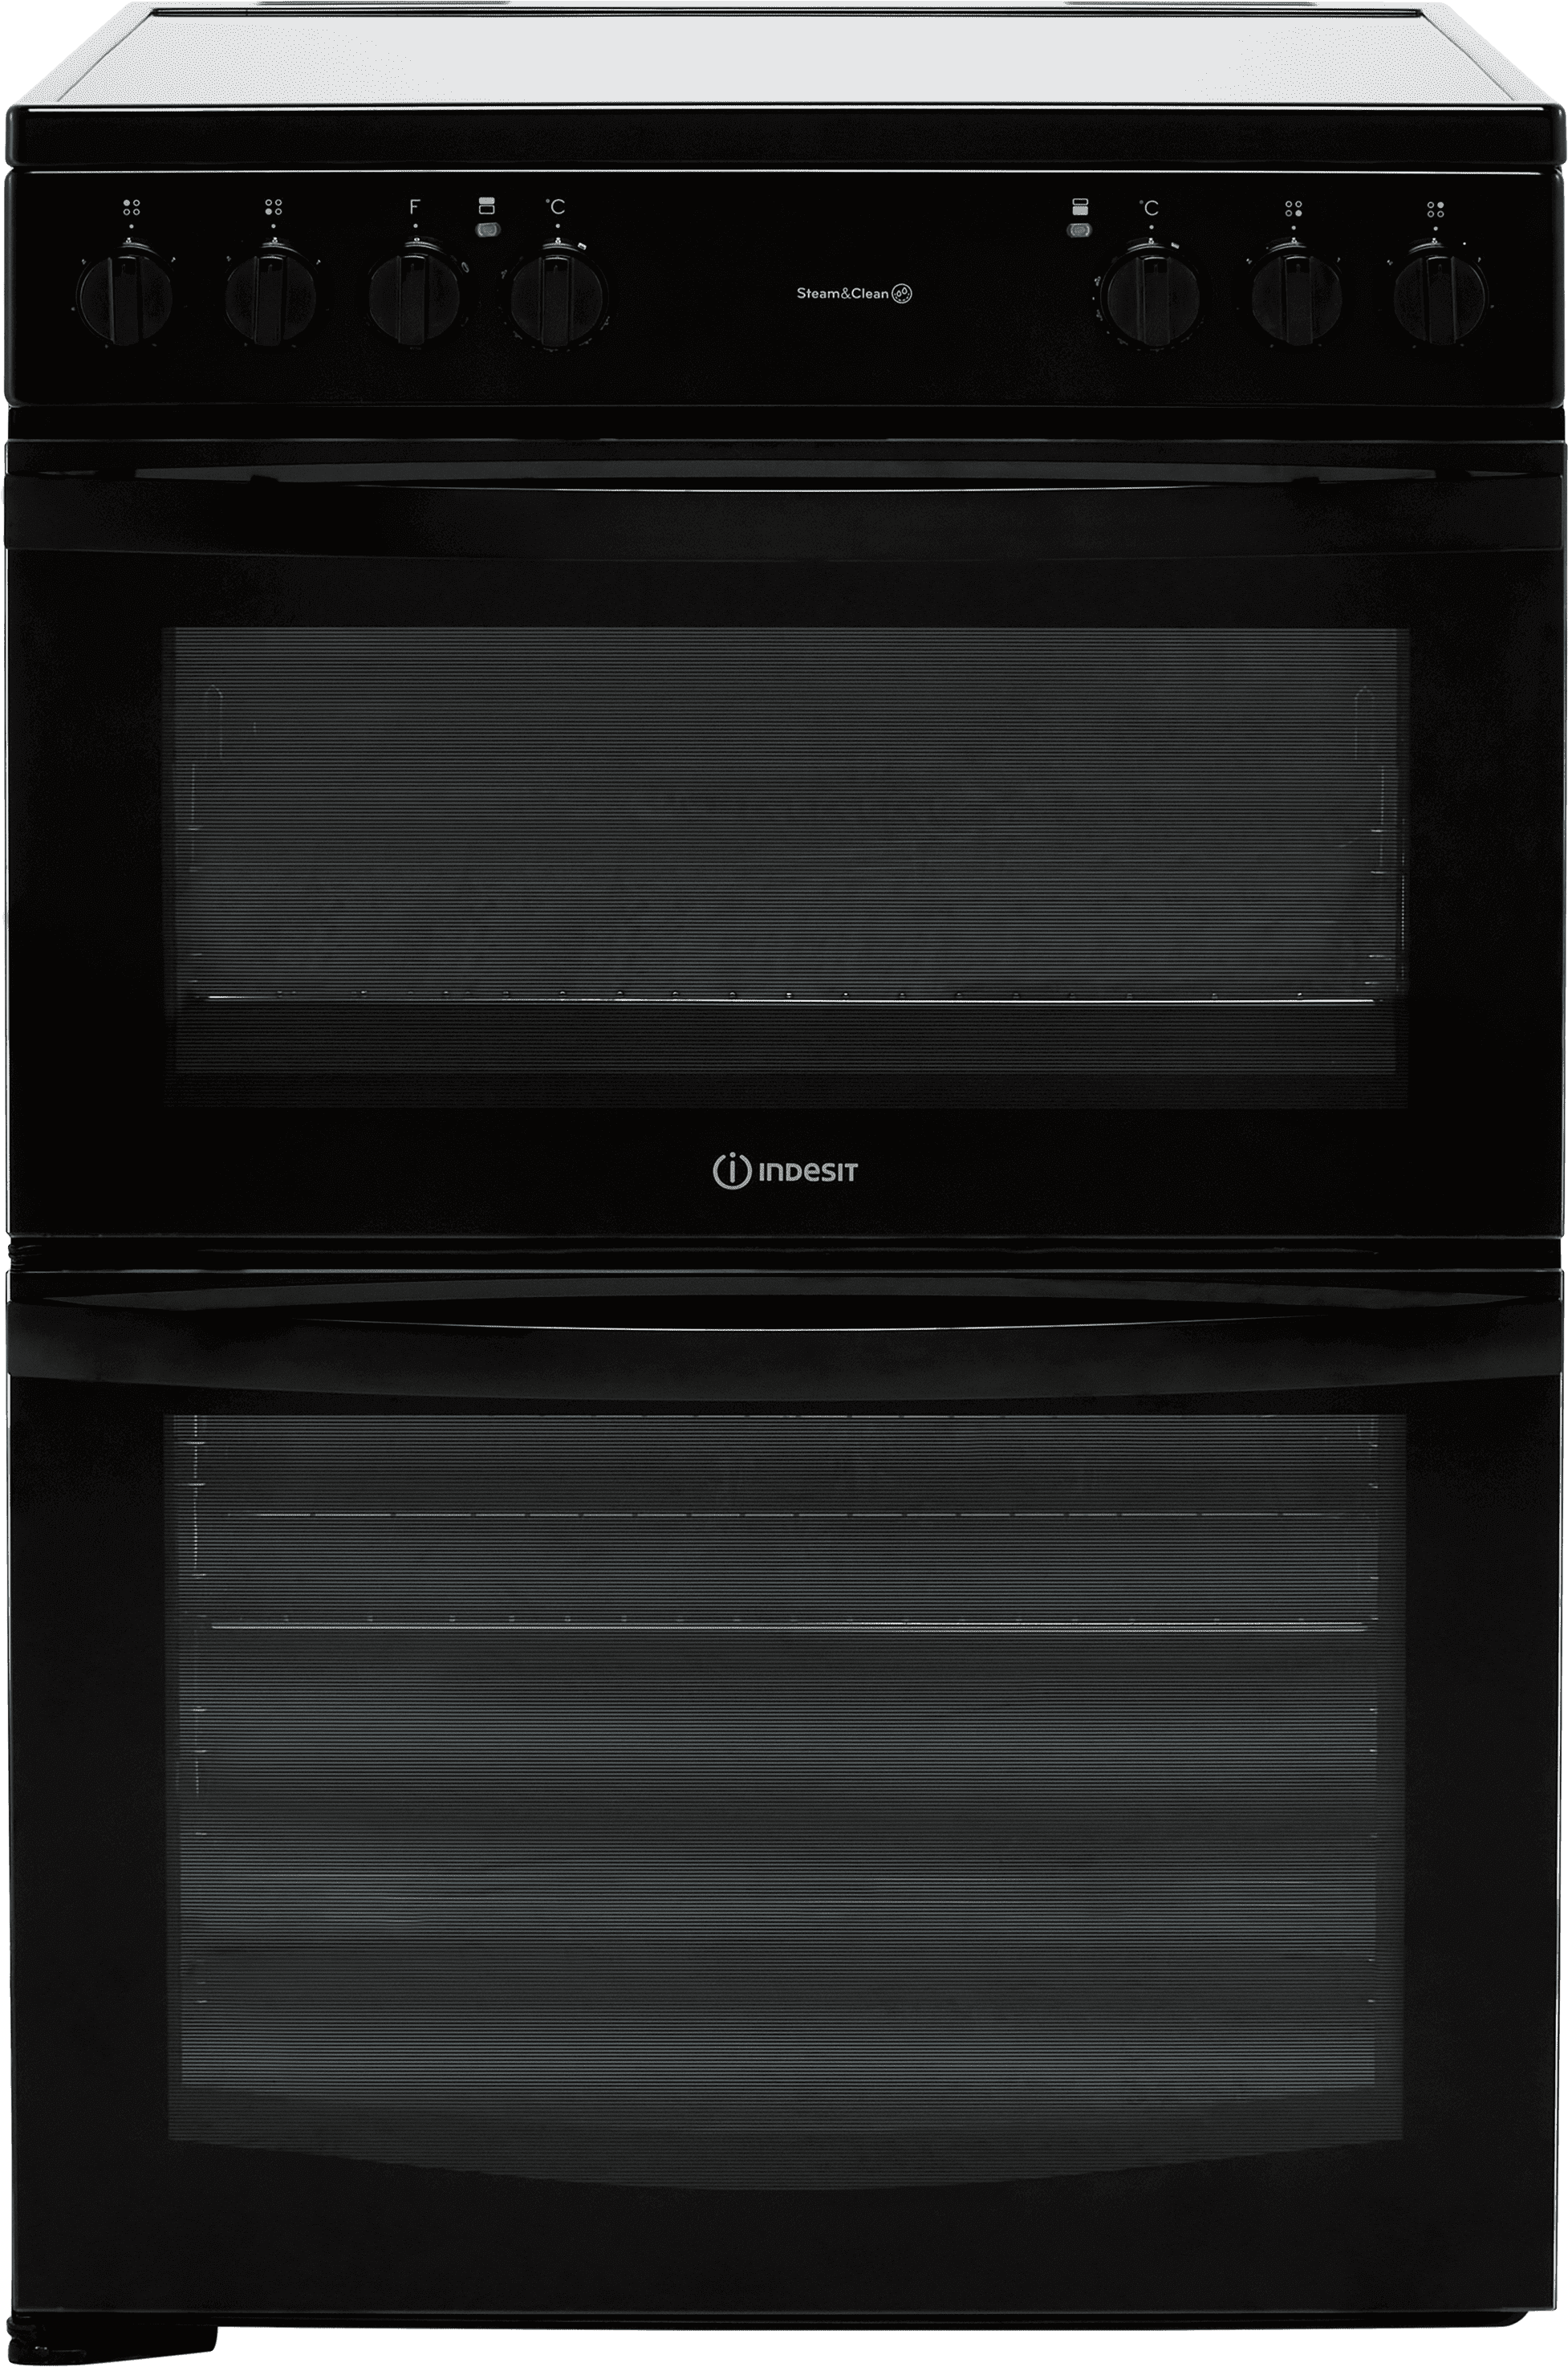 Indesit ID67V9KMB/UK 60cm Electric Cooker with Ceramic Hob - Black - A/A Rated, Black